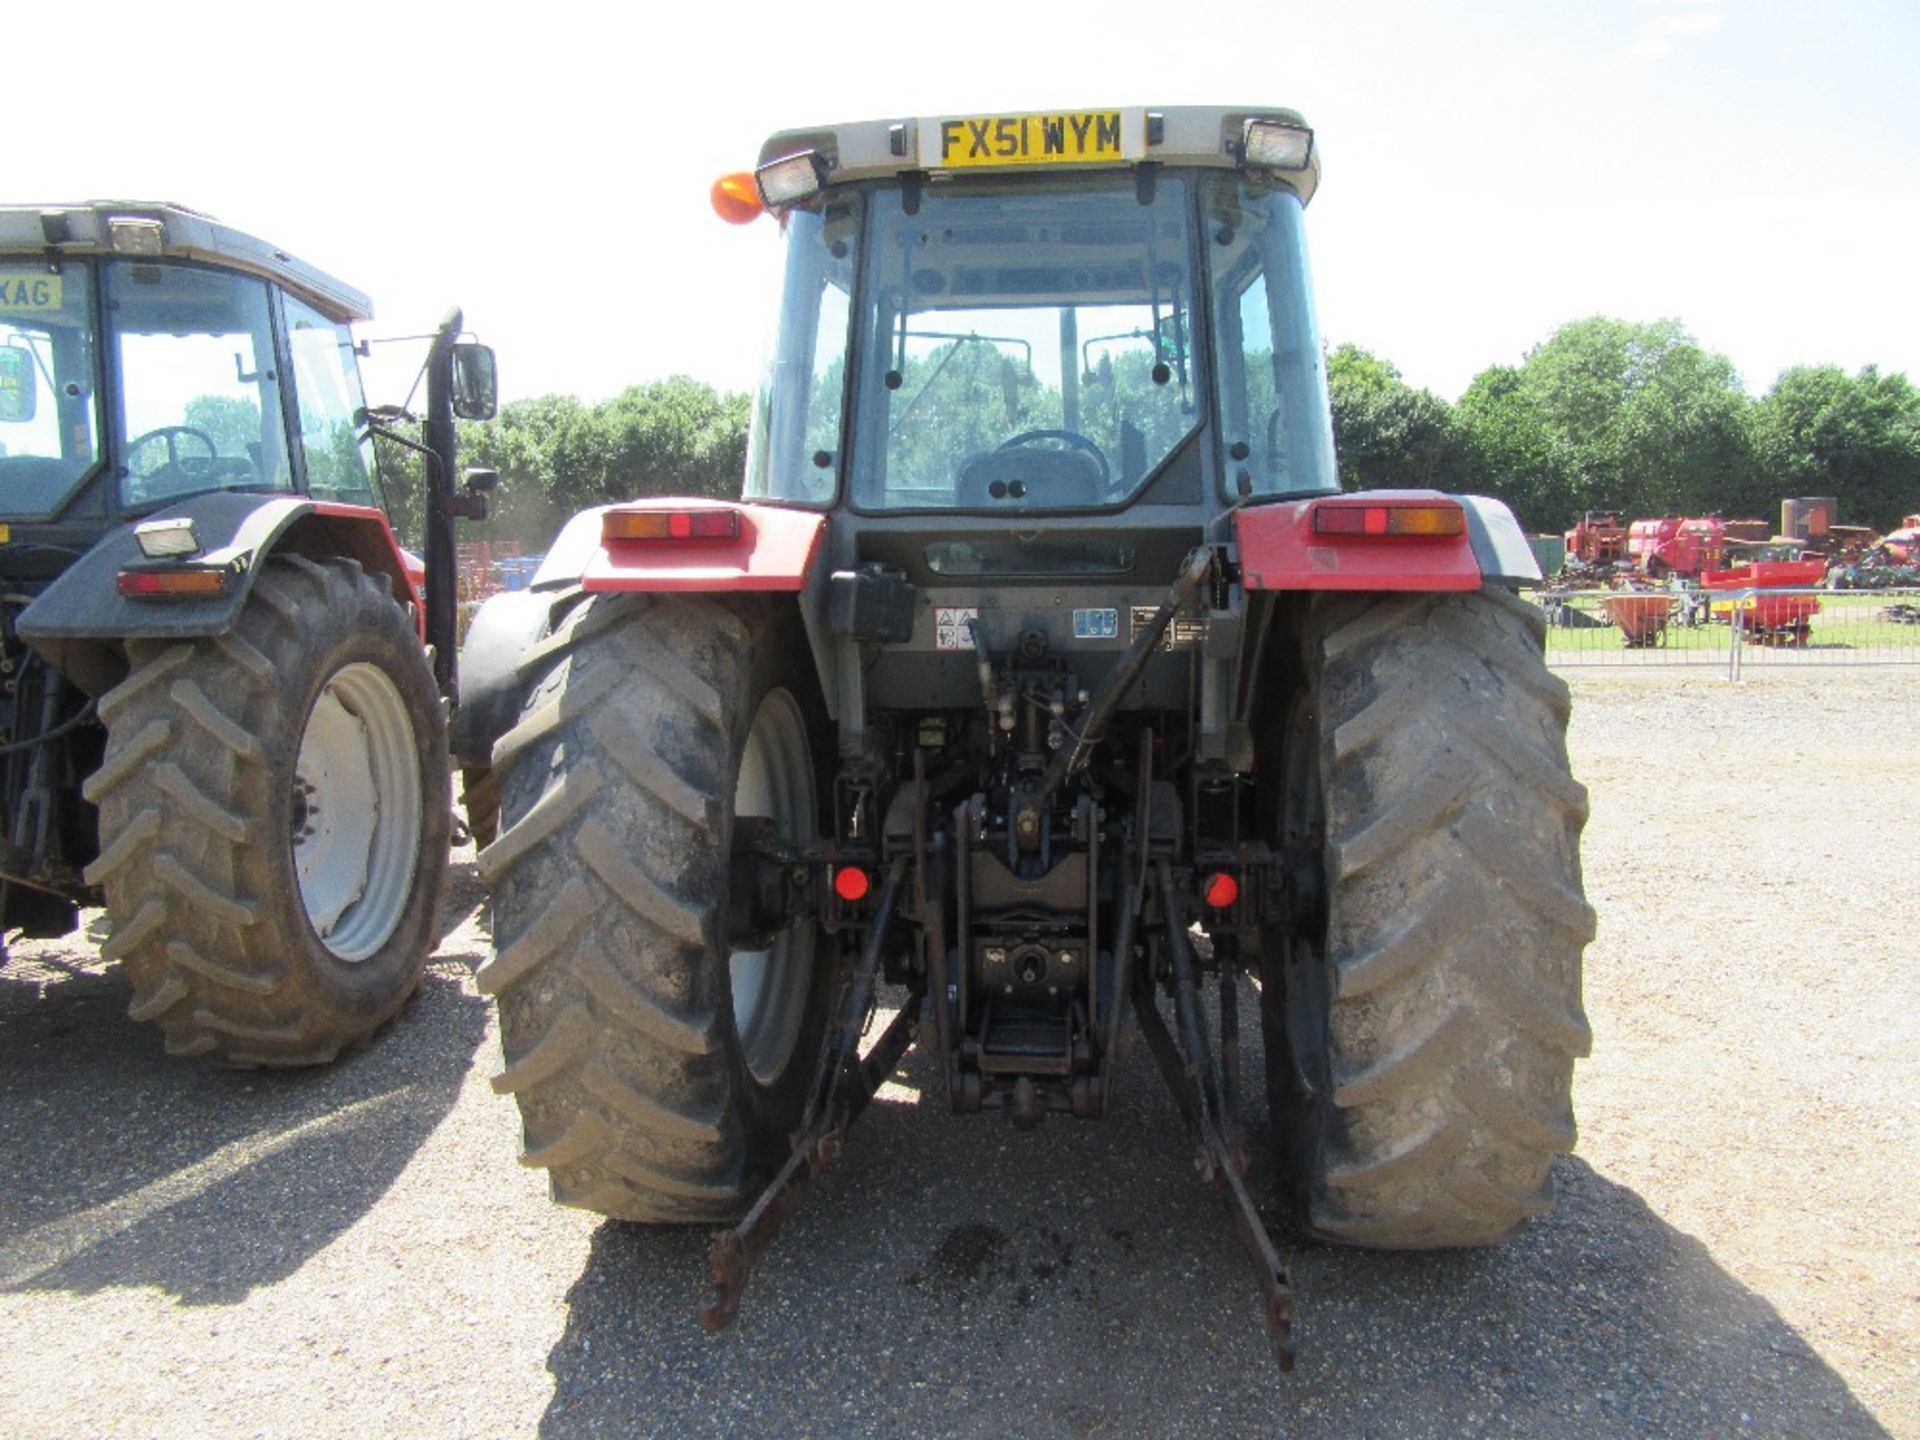 2001 Massey Ferguson 4355 Tractor With Quickie Loader. 4340 hrs. V5 will be supplied. Reg.No. FX51 - Image 4 of 13